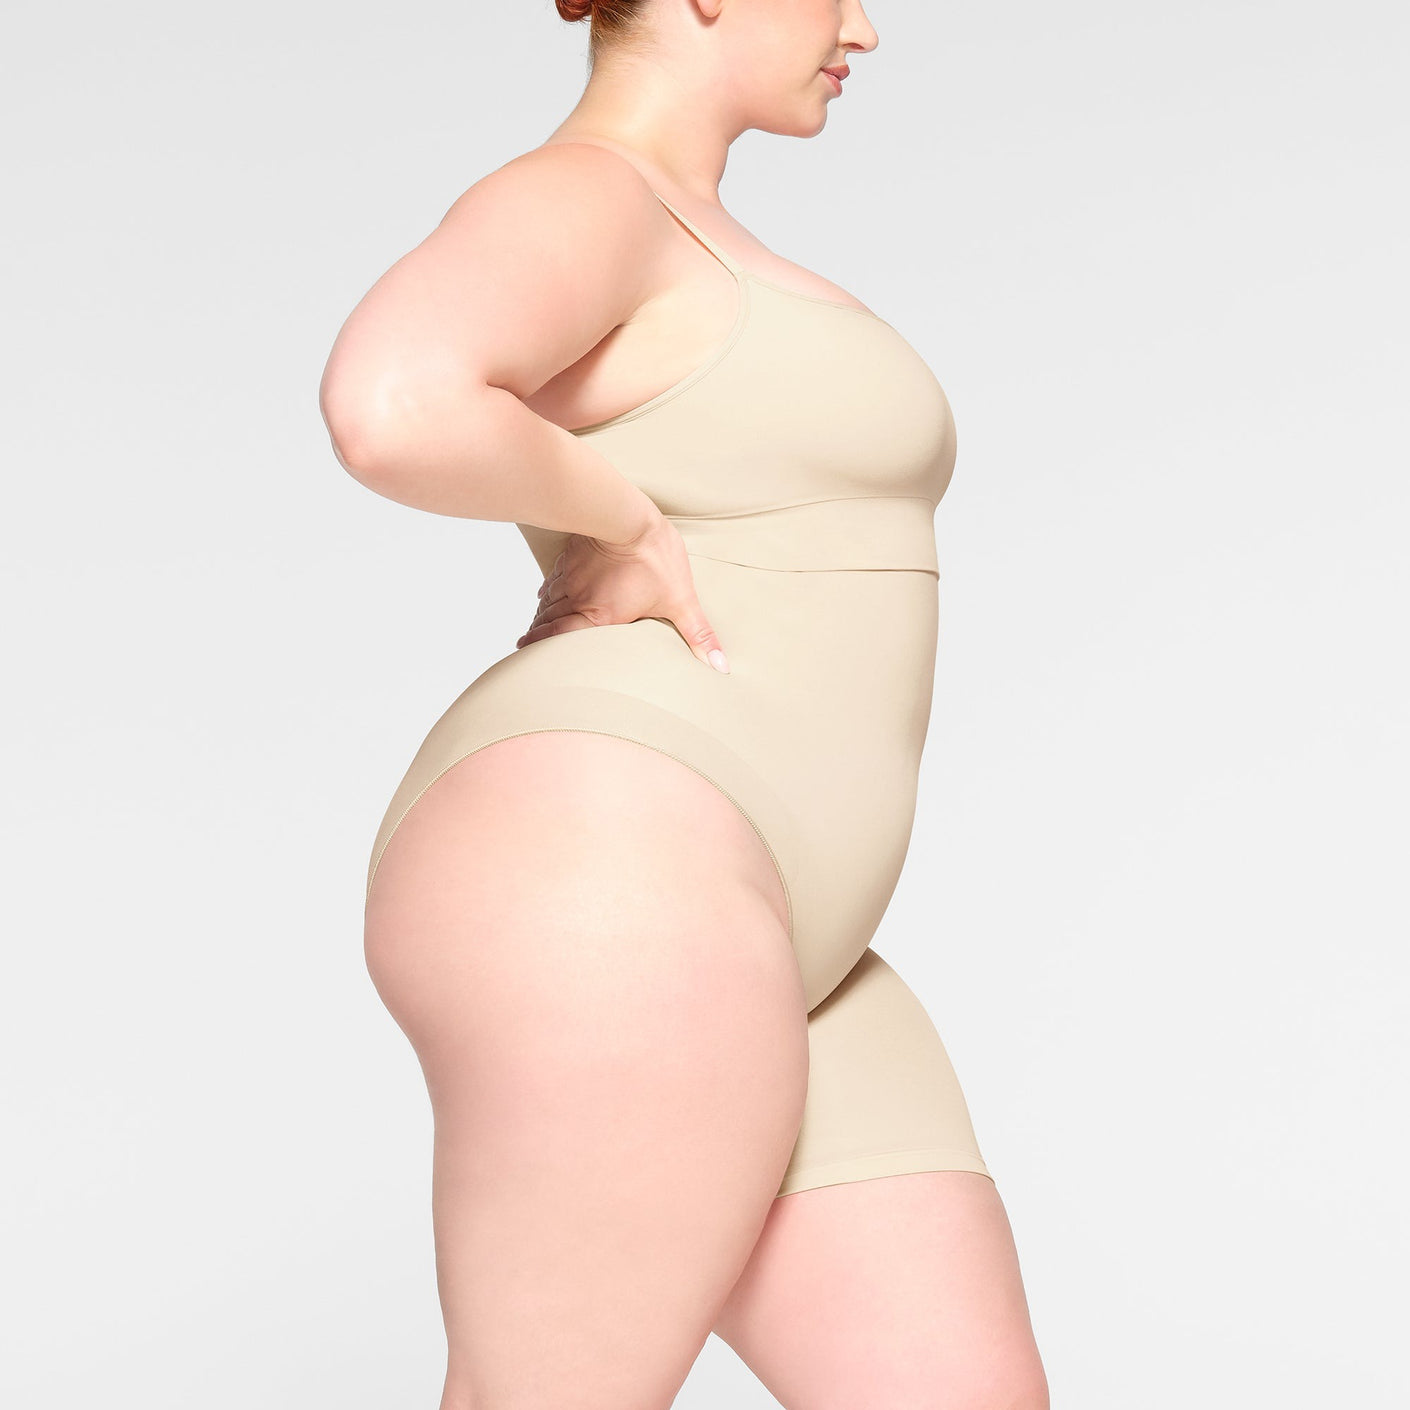 SKIMS - Tired of shapewear solutions that are too tight?